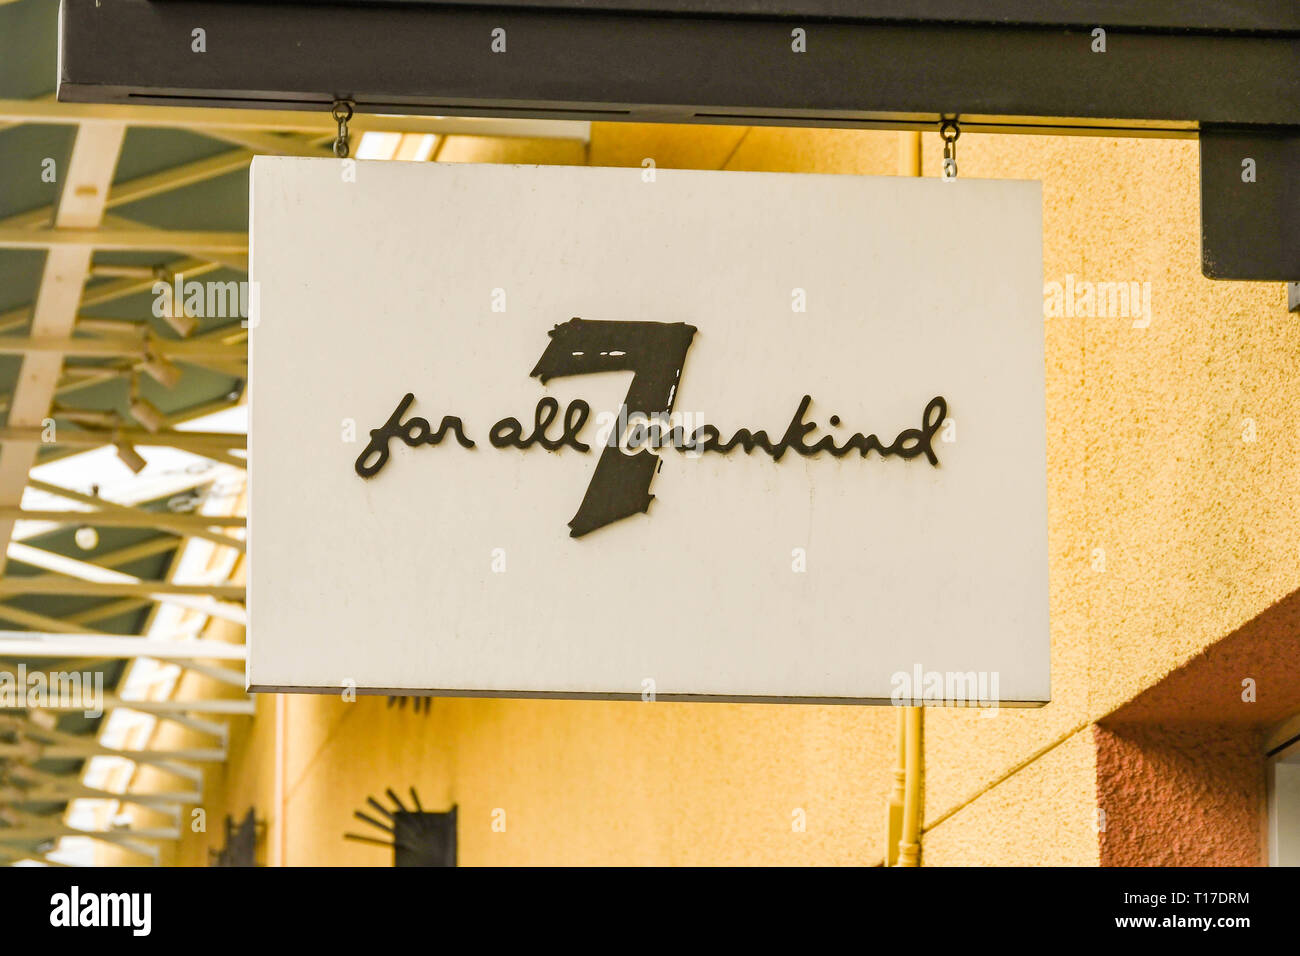 7 for all mankind outlet